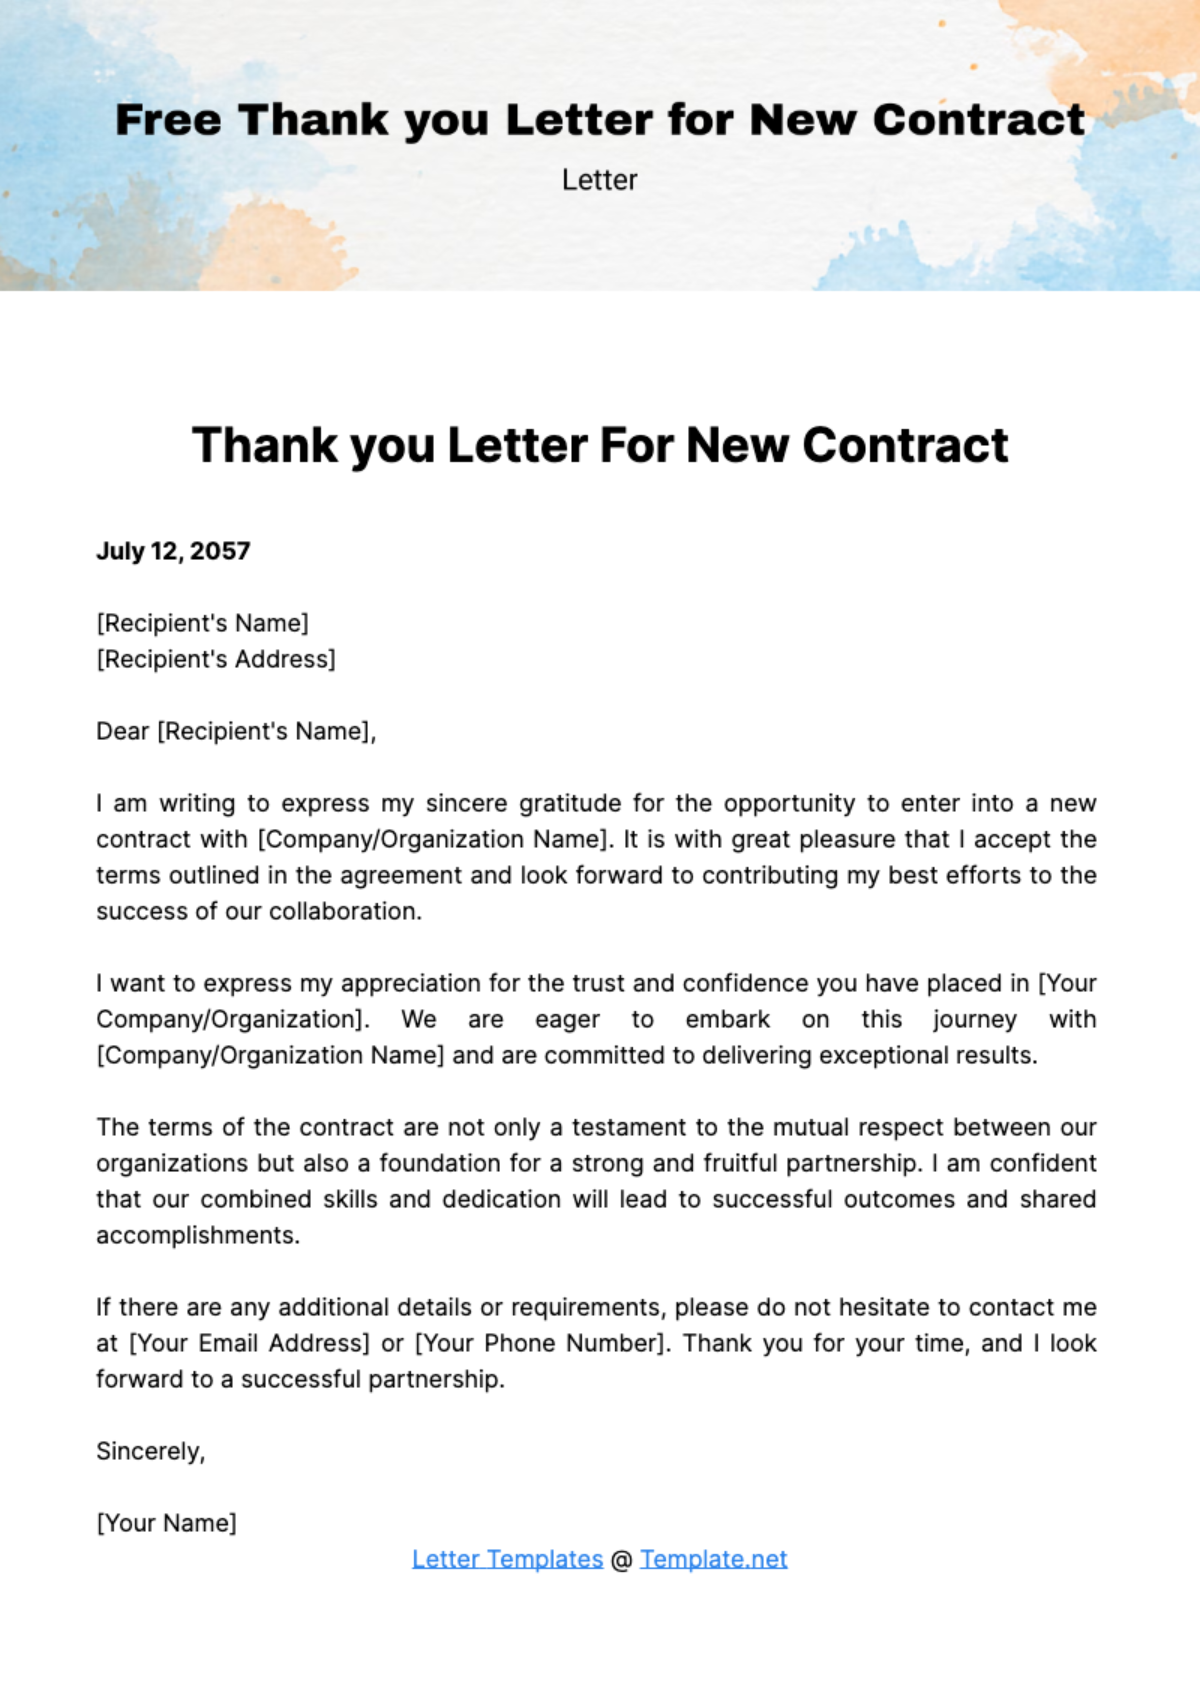 Thank you Letter for New Contract Template